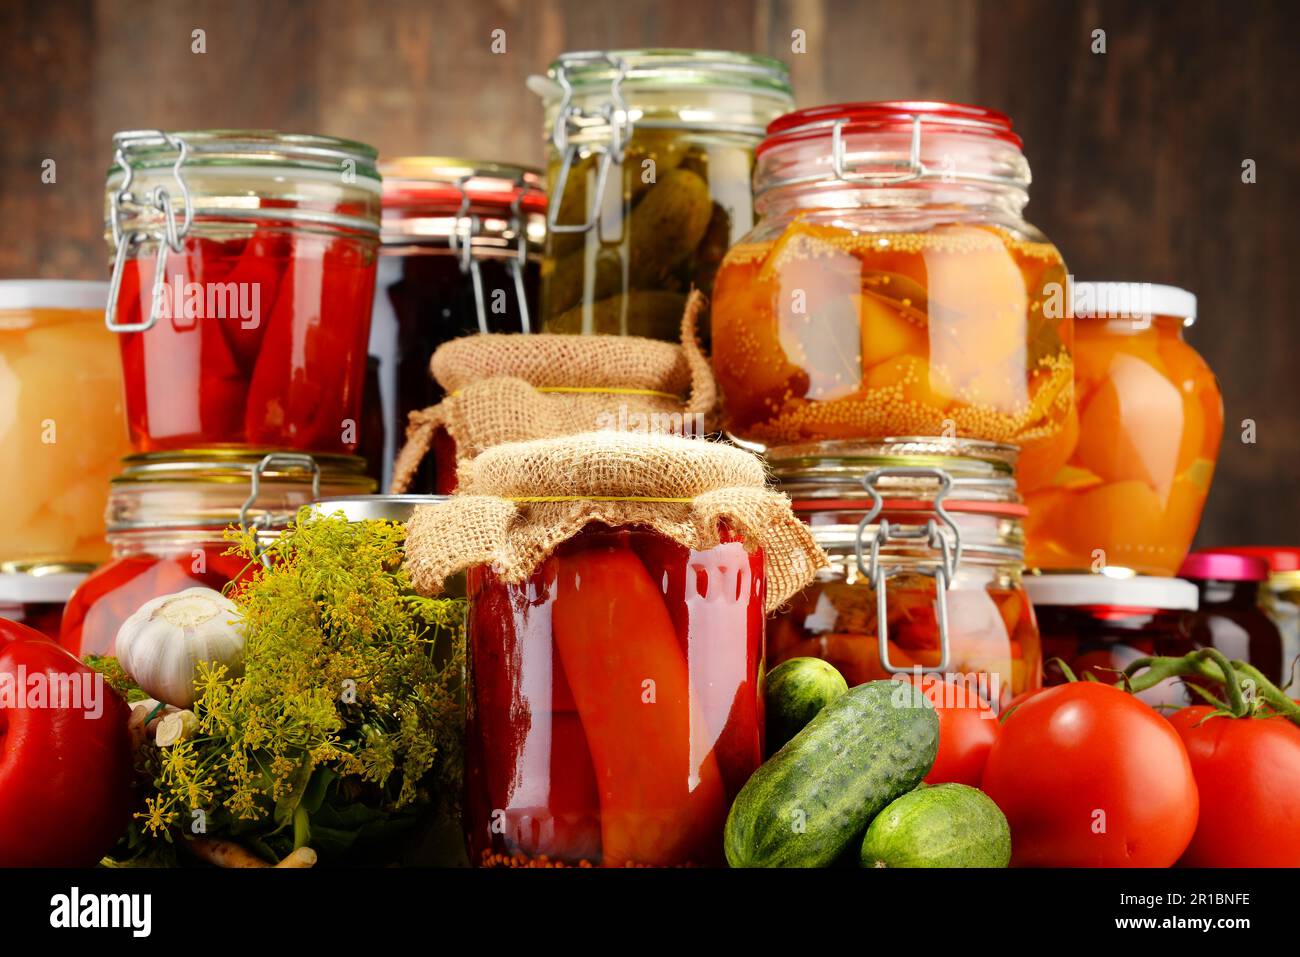 Jars with pickled vegetables and fruity compotes. Preserved food Stock Photo